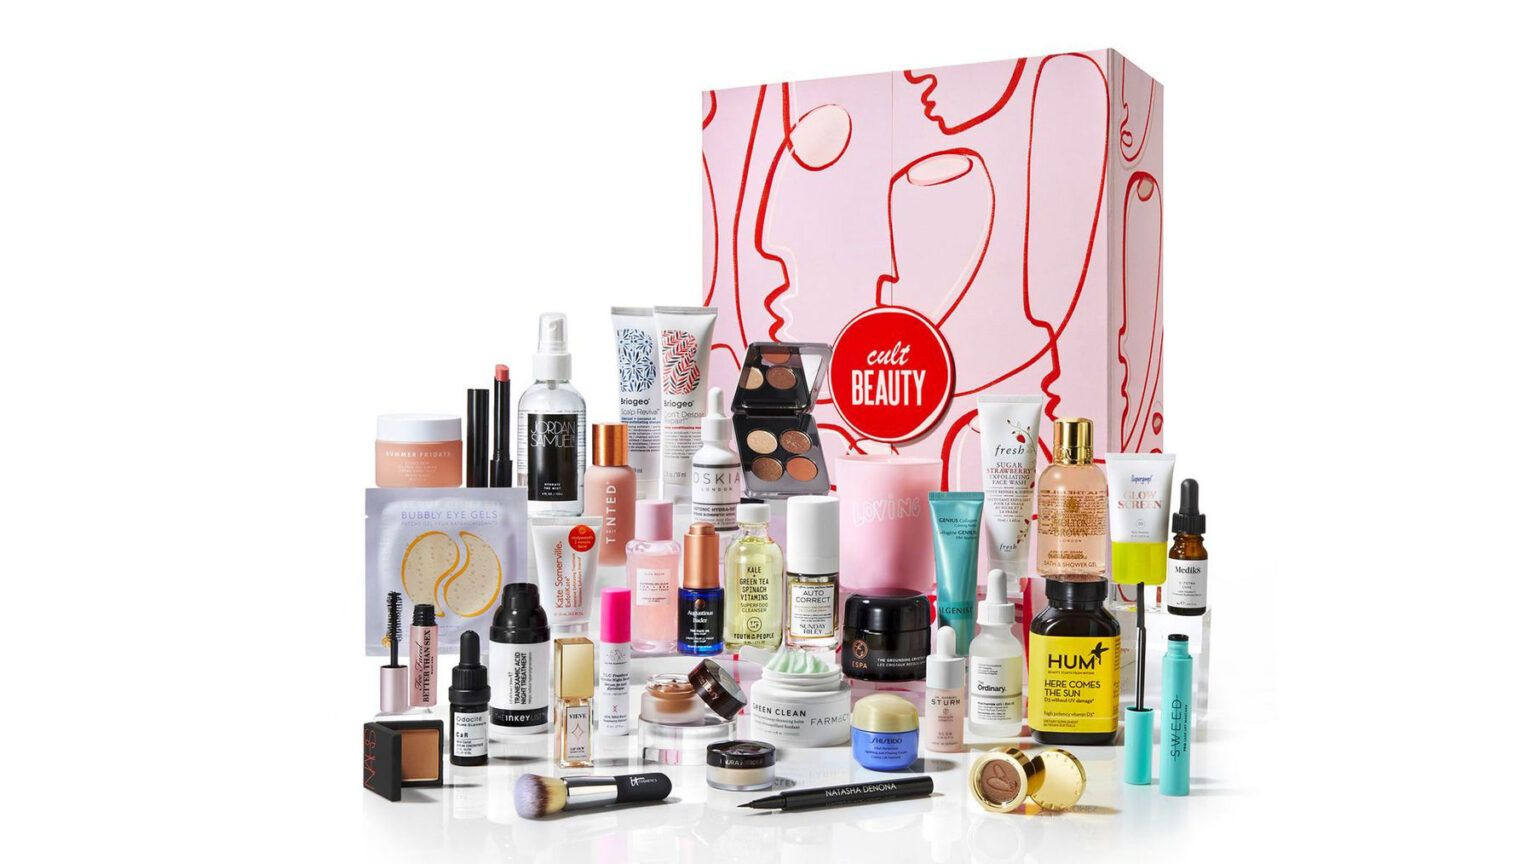 Cult Beauty Advent Calendar 2021: What'S Inside? - Mamabella